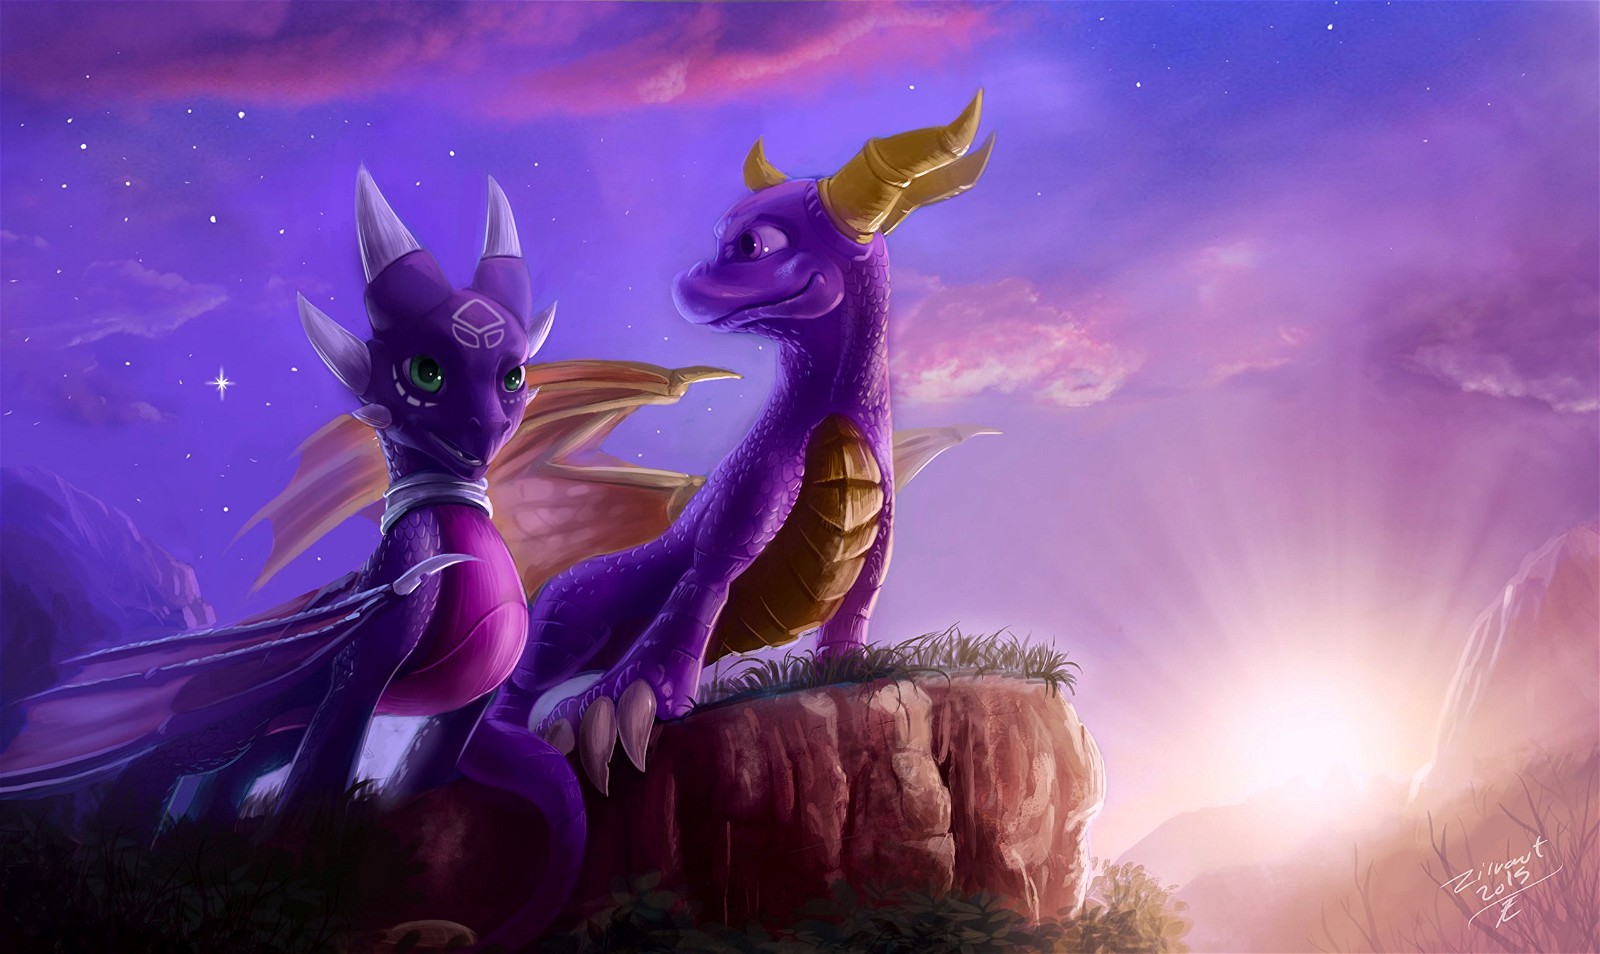 The game will reportedly also have Cynder as a playable character. Image Credit: Athah Designs